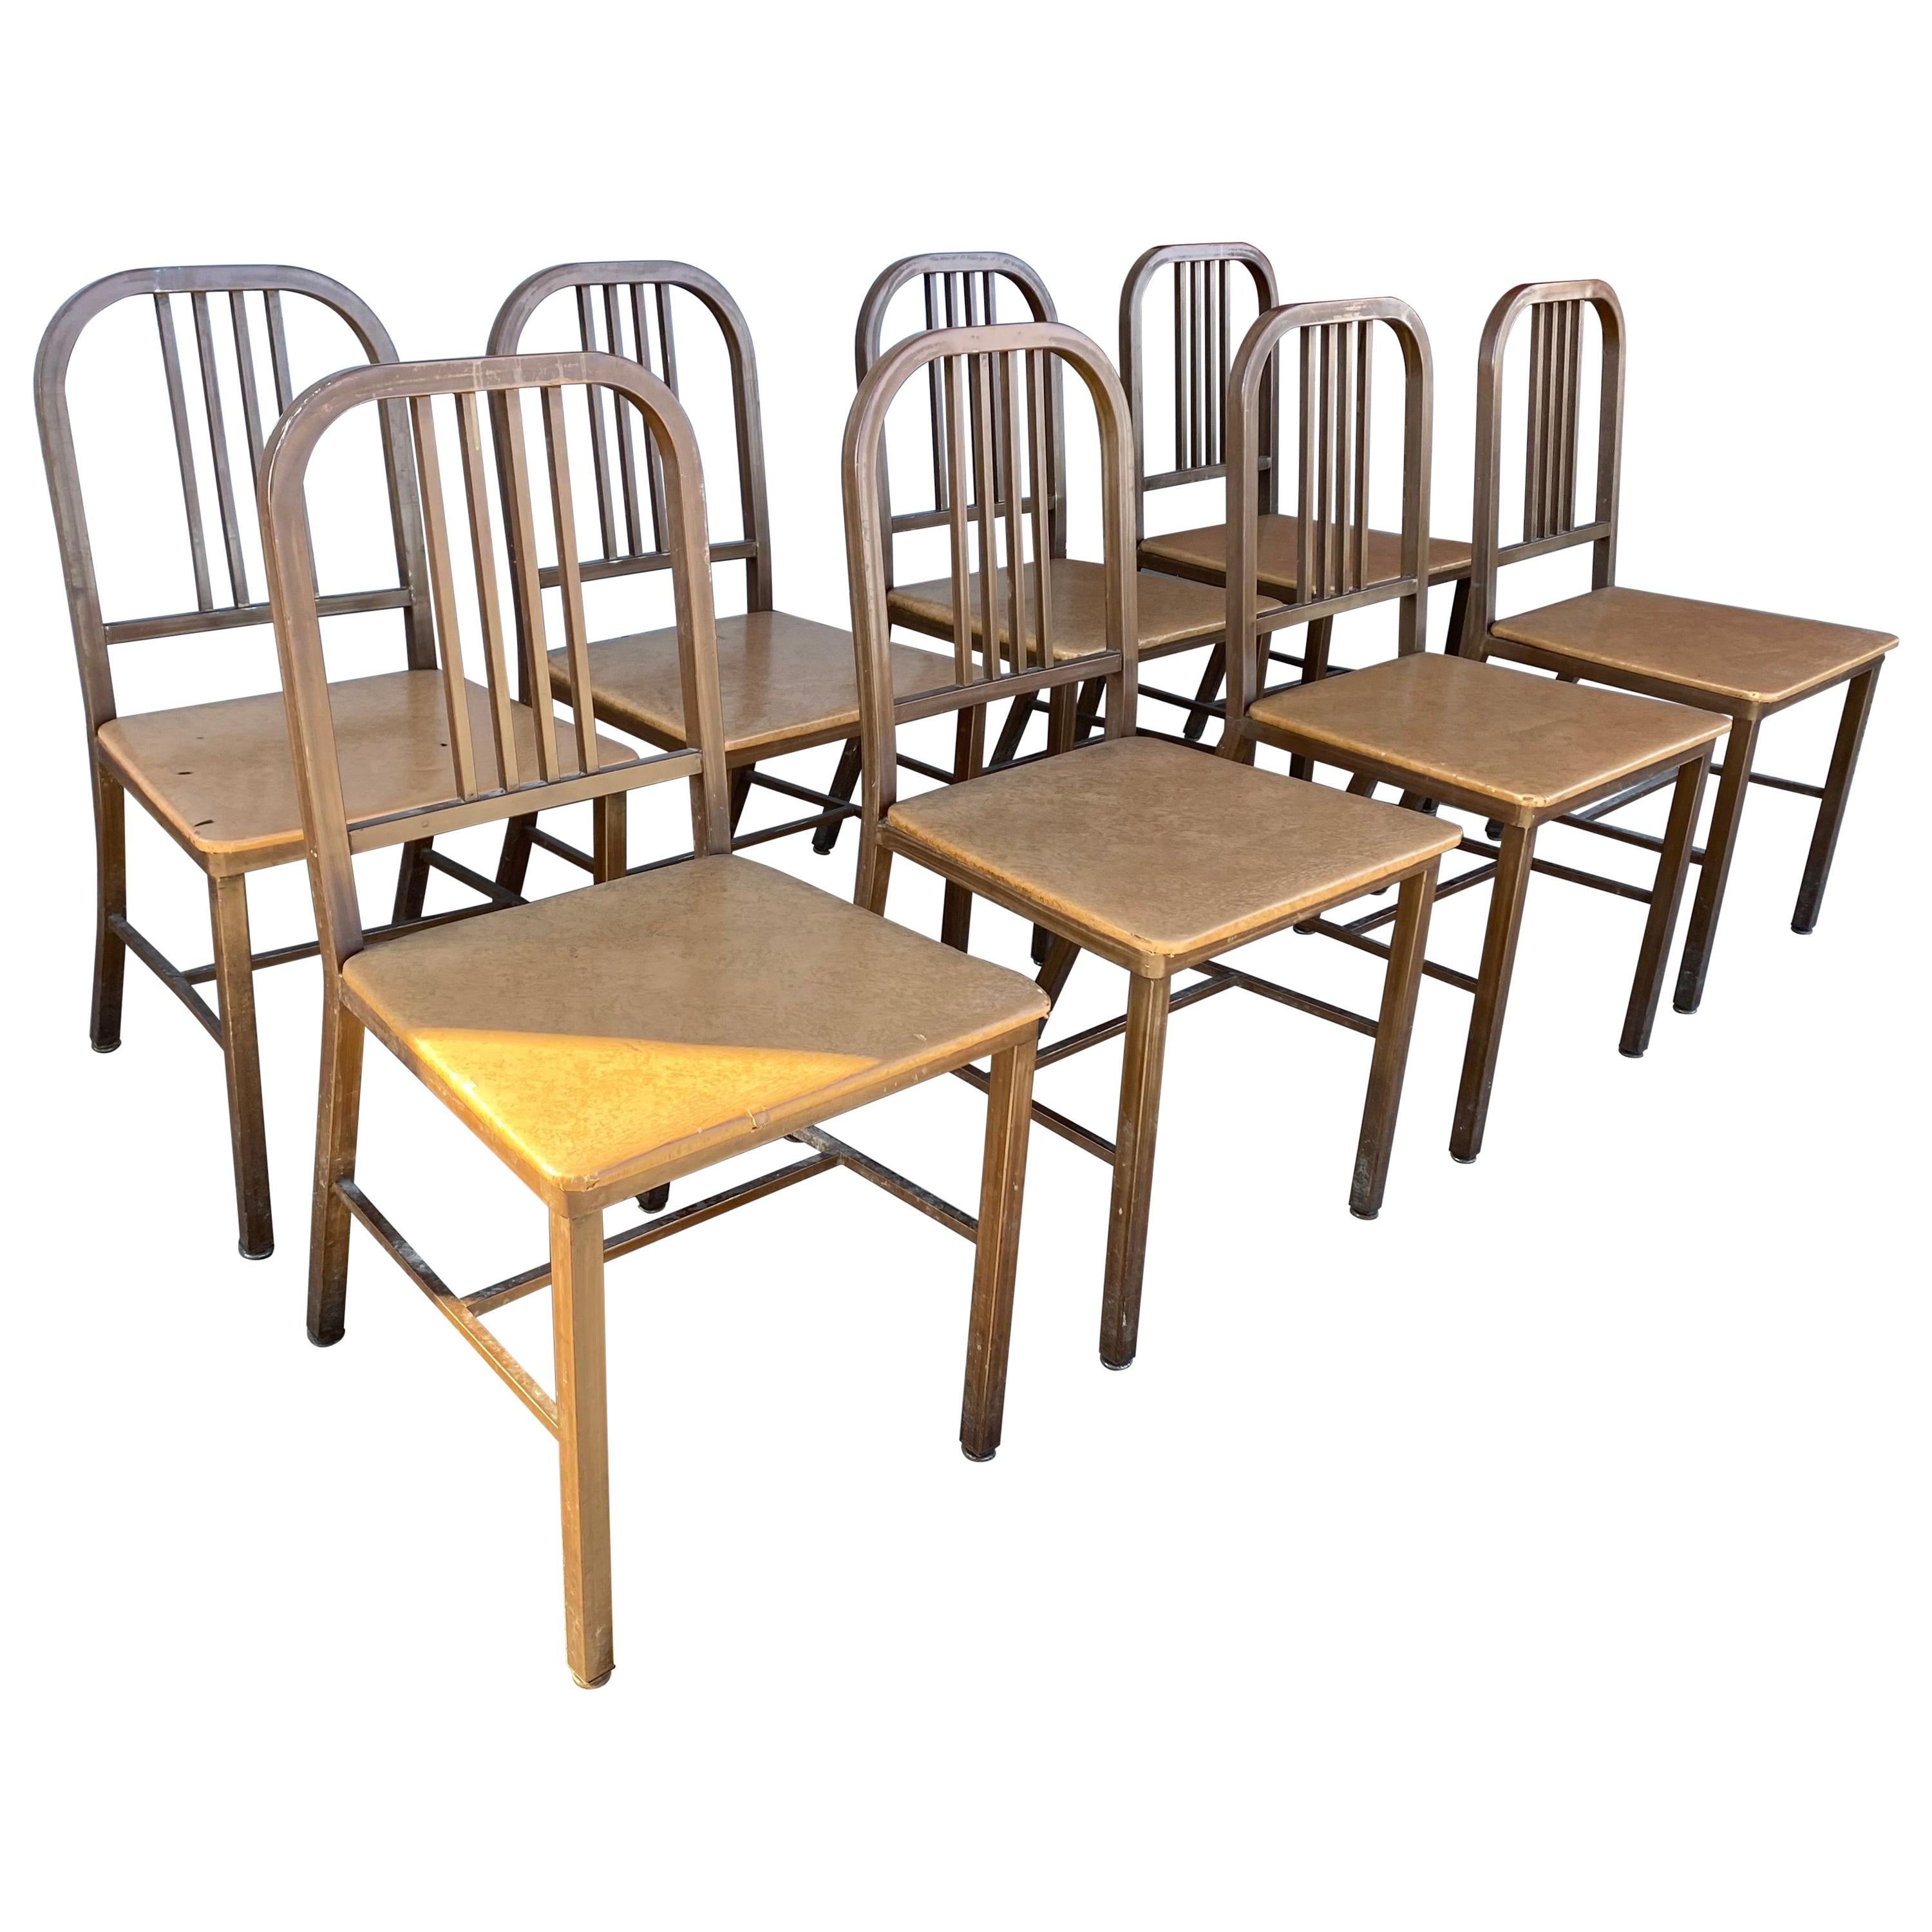 Set of 8 Classic Industrial Metal Side Chairs Made by HARD MFG CO